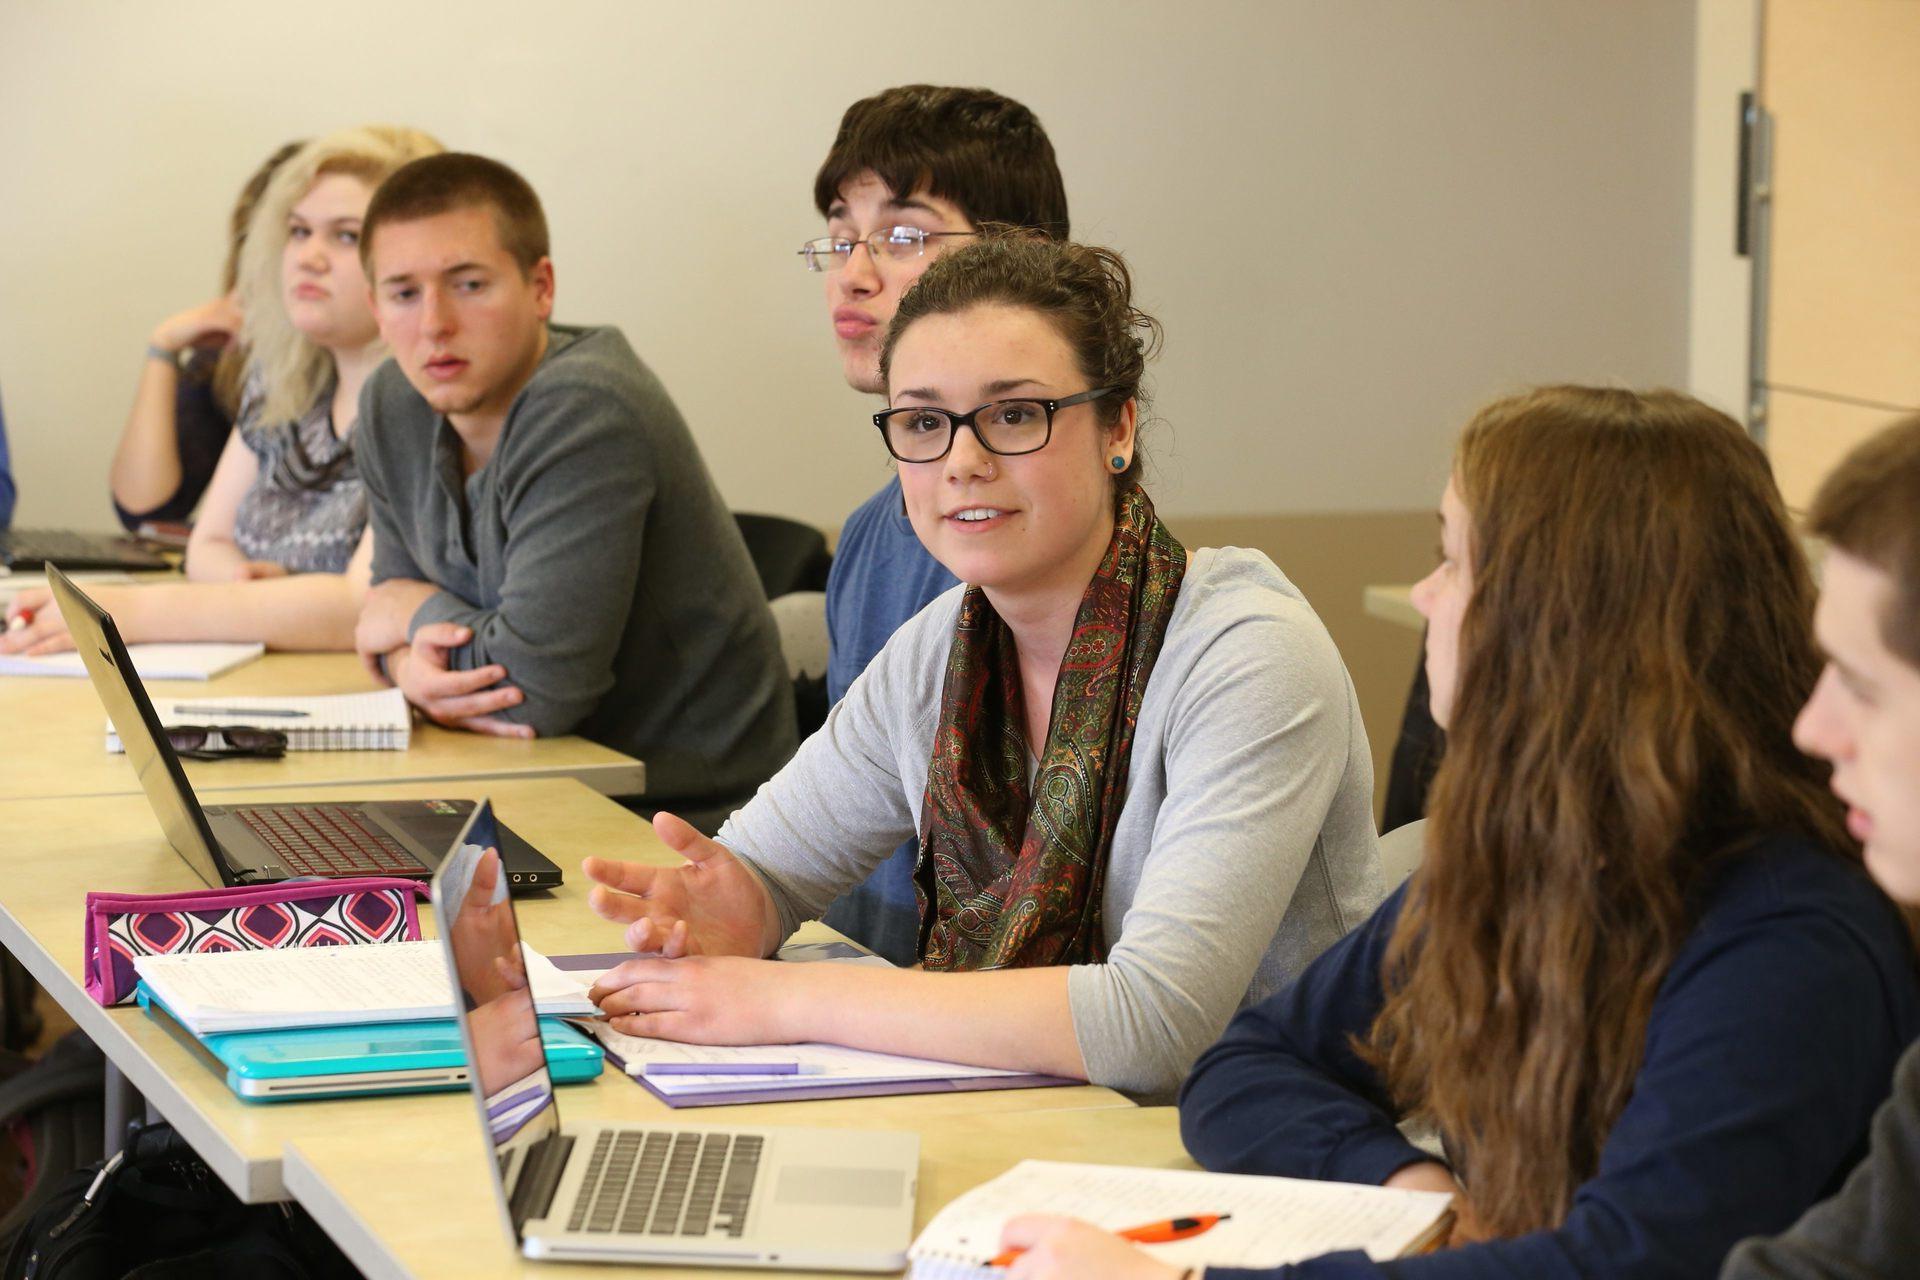 A BGSU graduate class discussing subjects with diverse colleagues is often the most valued form of learning.